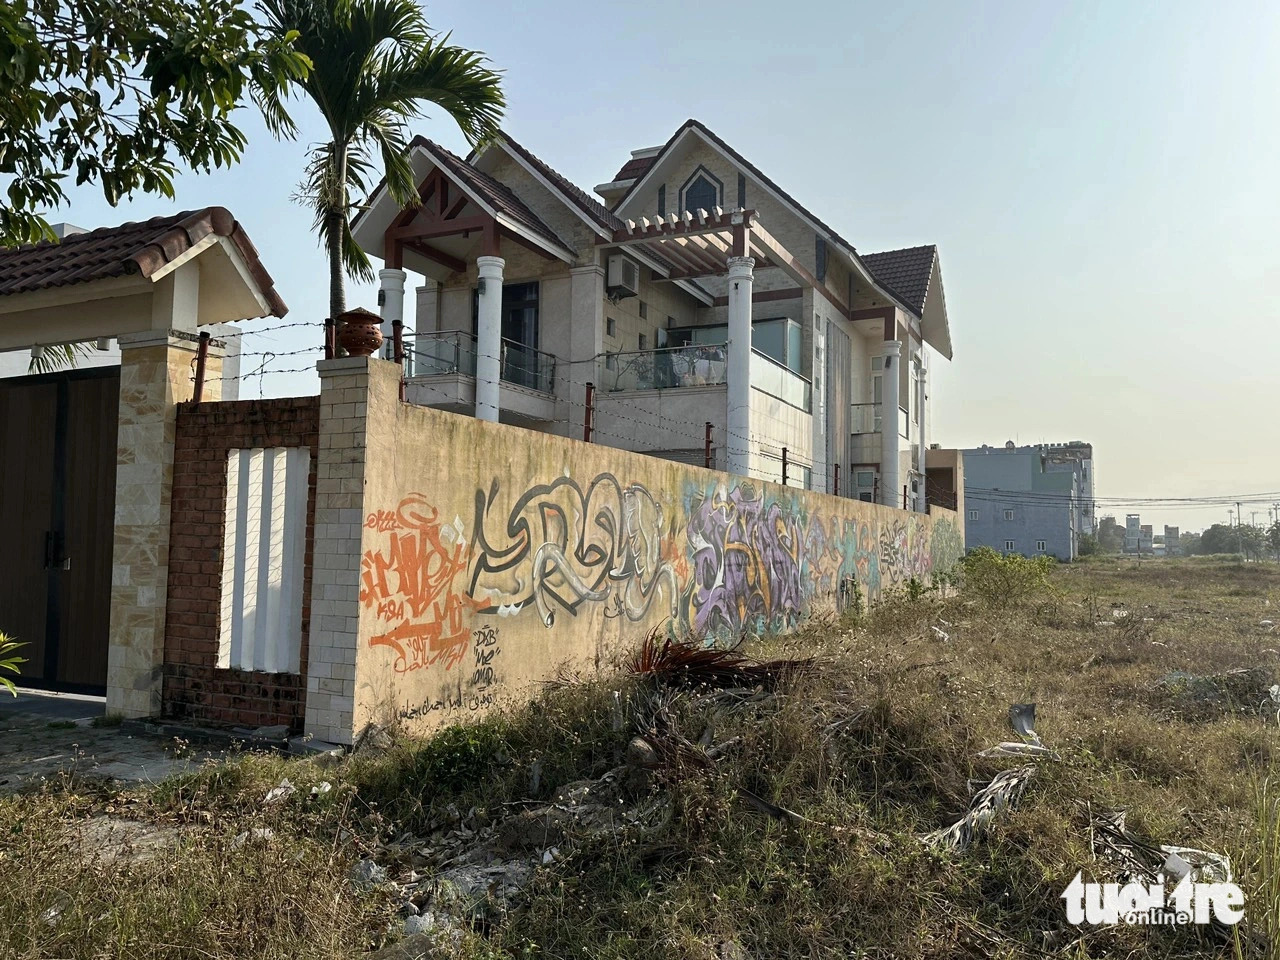 A wall of a house in Ngu Hanh Son District, Da Nang City, central Vietnam is vandalized by graffiti. Photo: Tuoi Tre